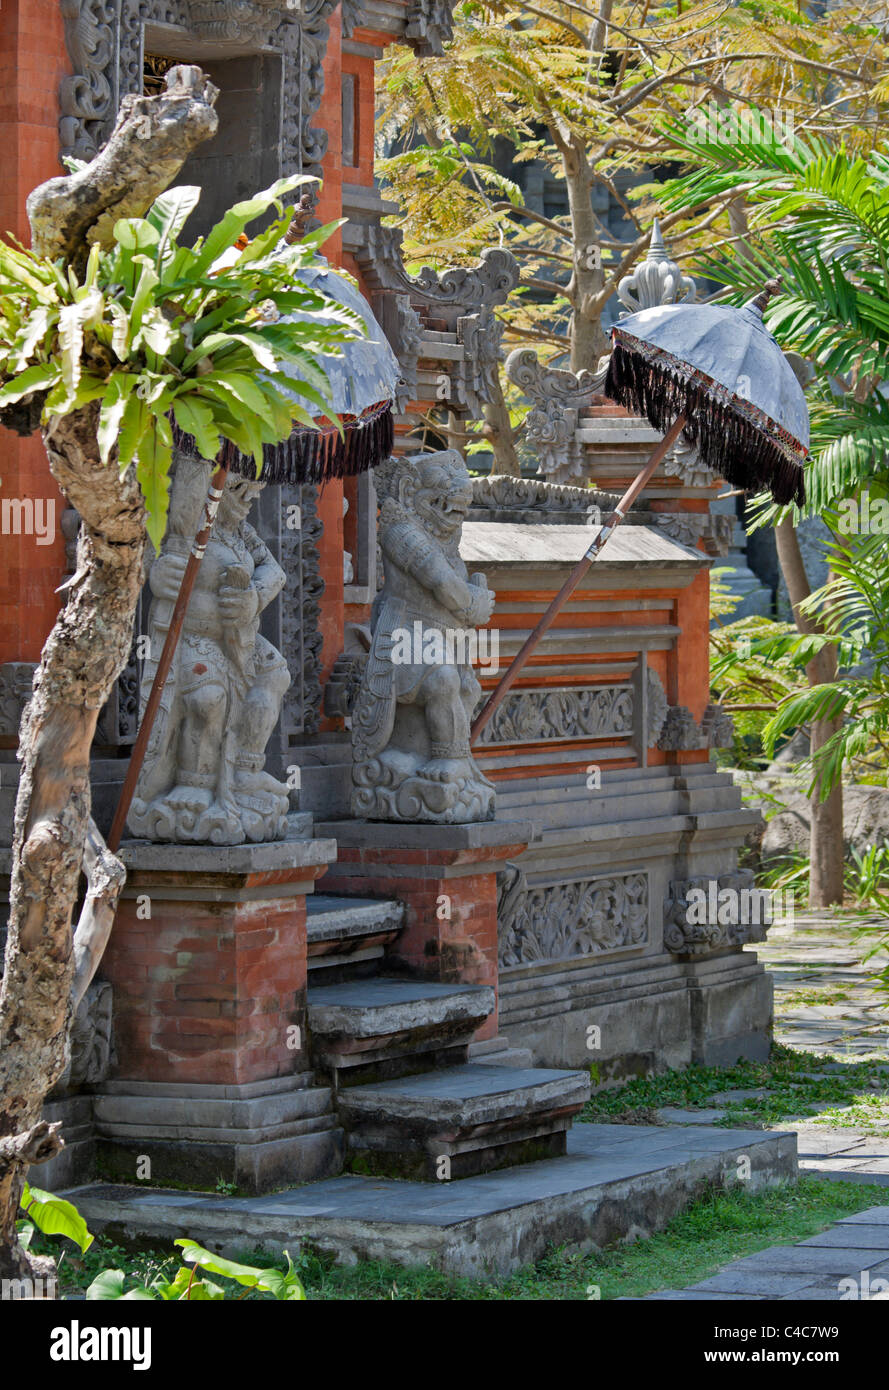 Balinese Temple in Indonesia Stock Photo